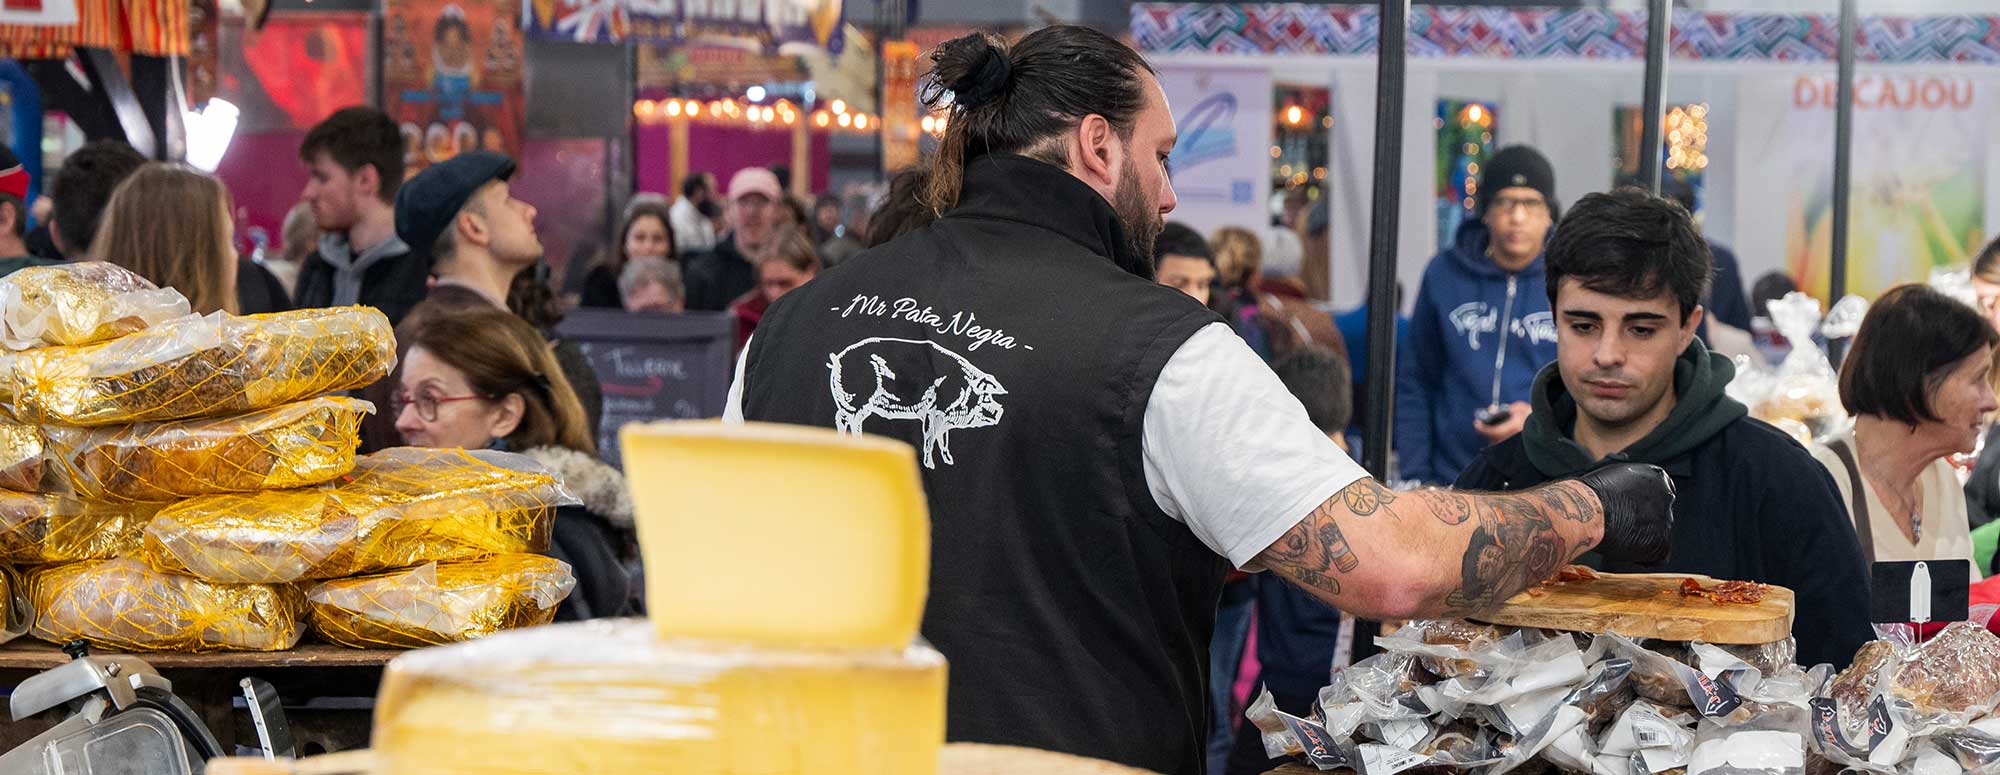 Exhibitor on a cheese and charcuterie stall